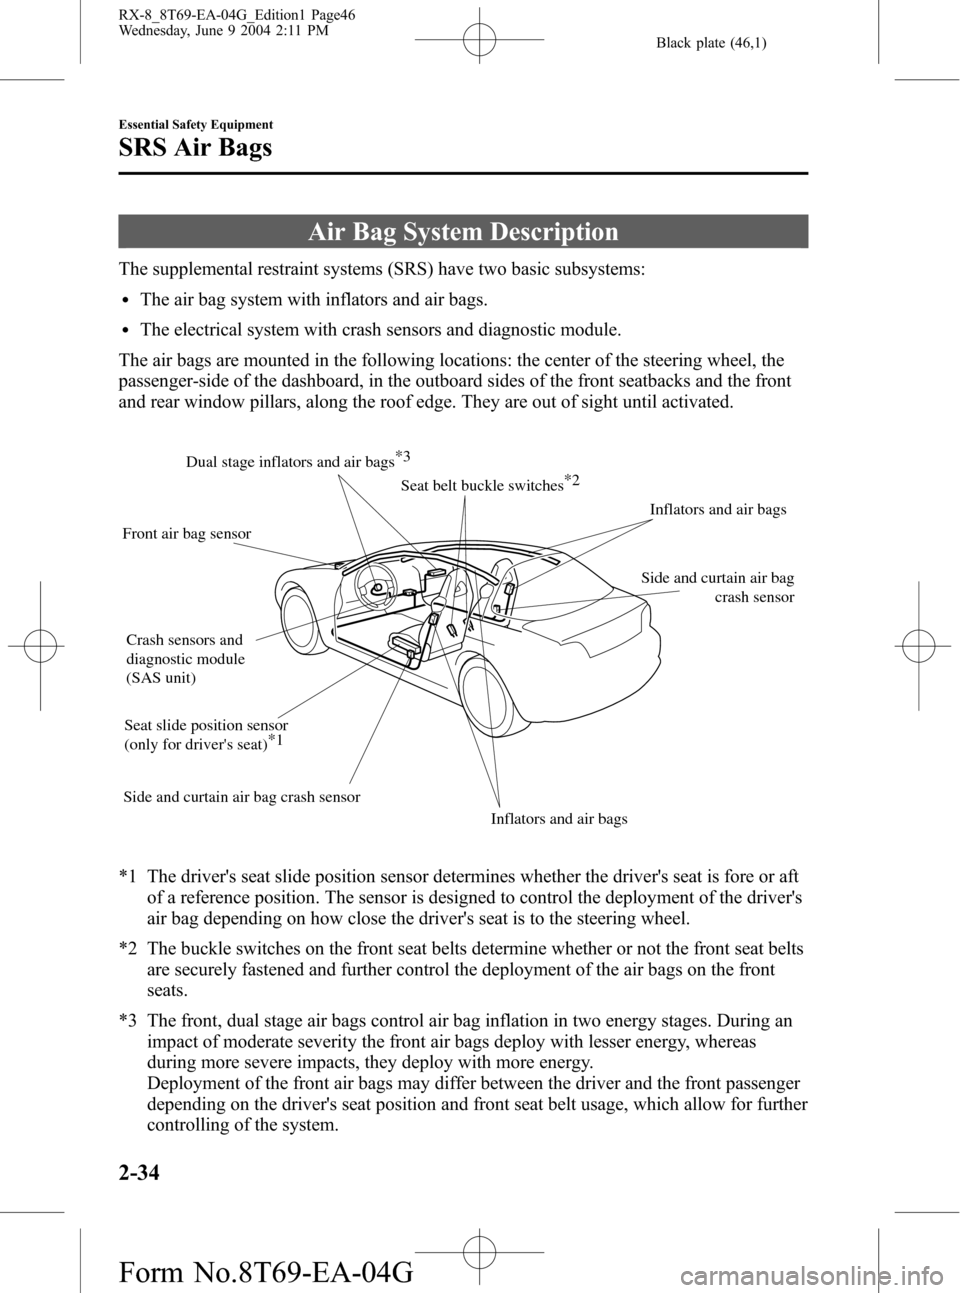 MAZDA MODEL RX 8 2005   (in English) Service Manual Black plate (46,1)
Air Bag System Description
The supplemental restraint systems (SRS) have two basic subsystems:
lThe air bag system with inflators and air bags.
lThe electrical system with crash sen